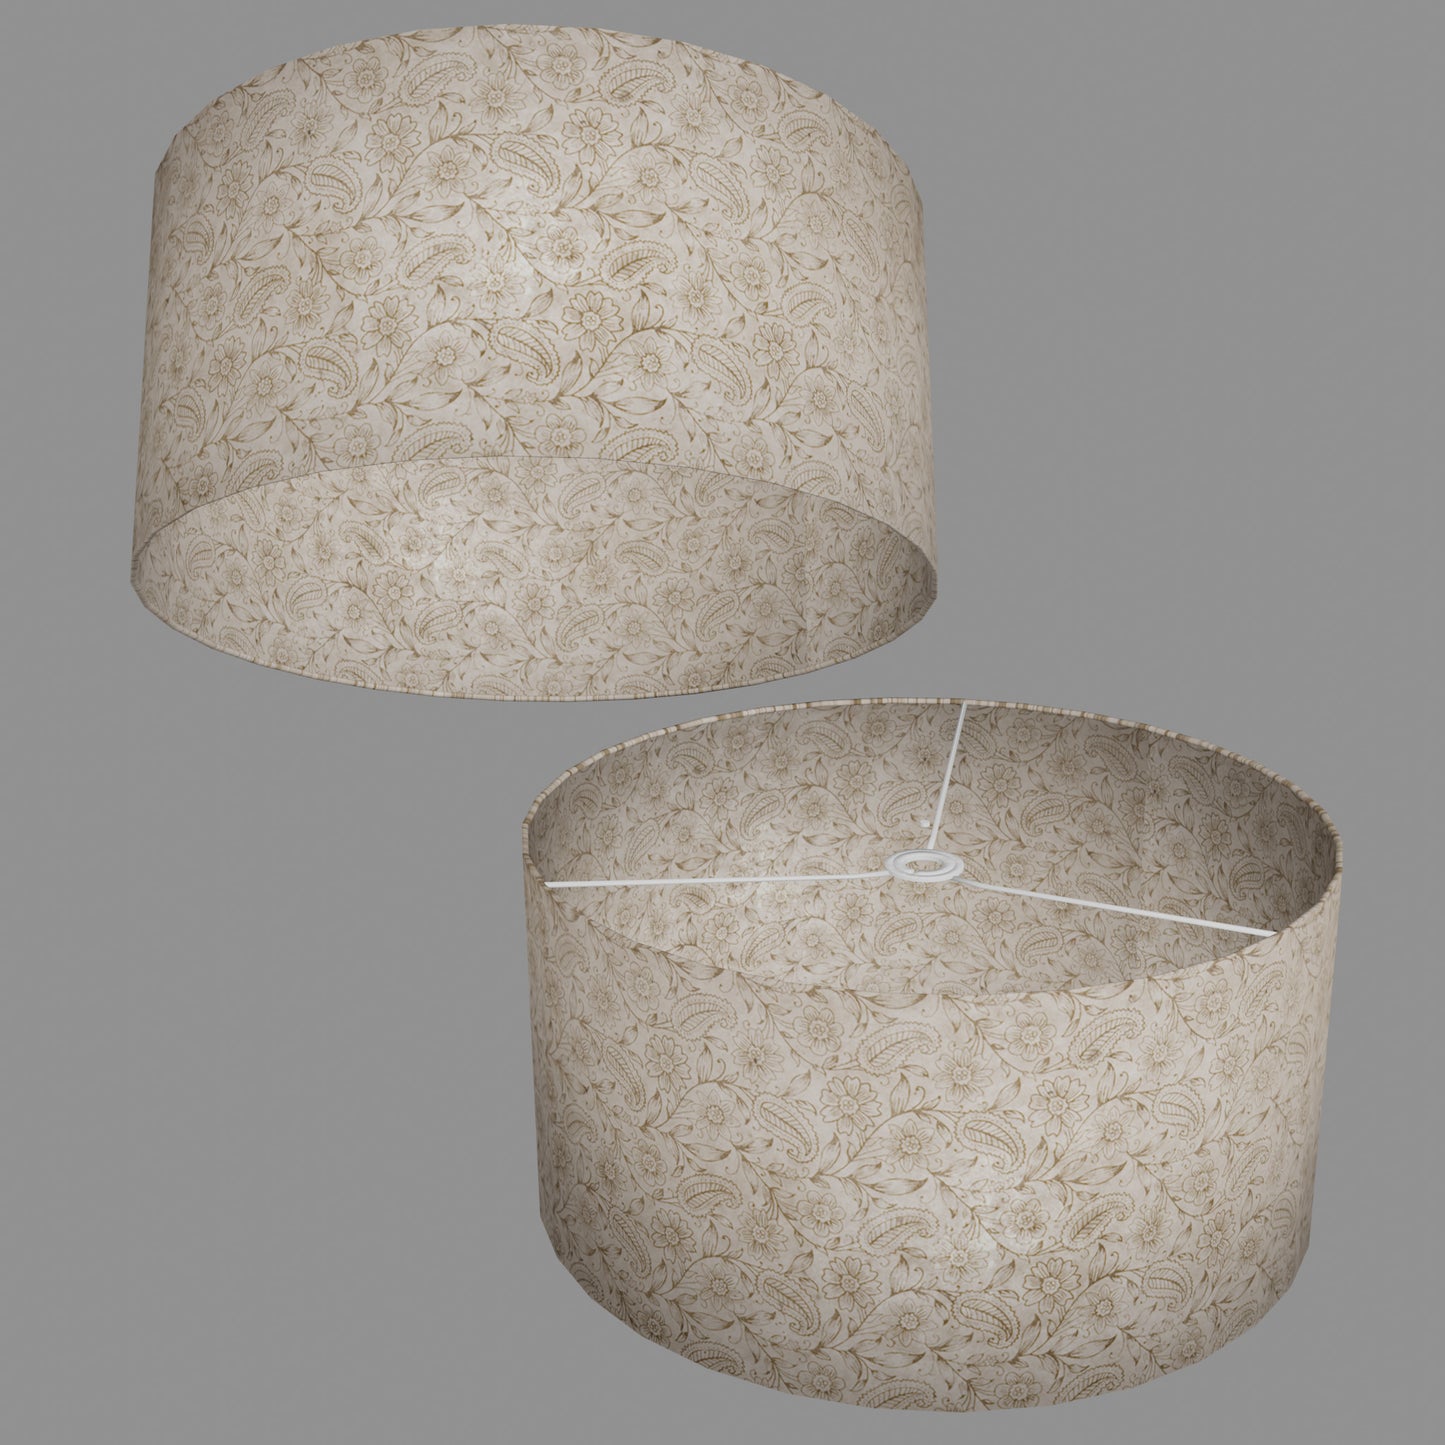 Drum Lamp Shade - P69 - Garden Gold on Natural, 50cm(d) x 25cm(h)